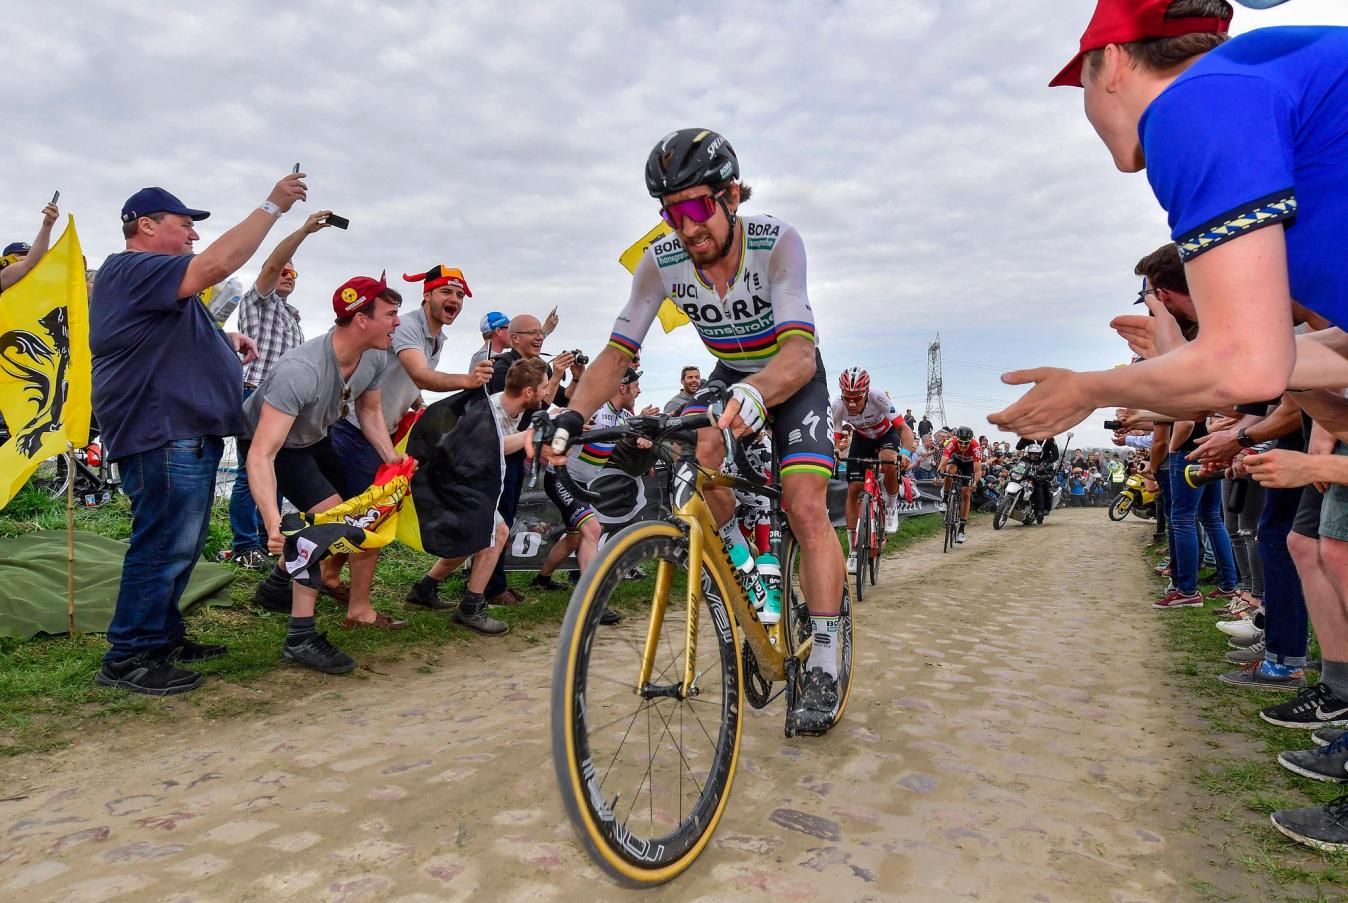 In his final year as world champion, Peter Sagan left the peloton in his wake to win Paris-Roubaix